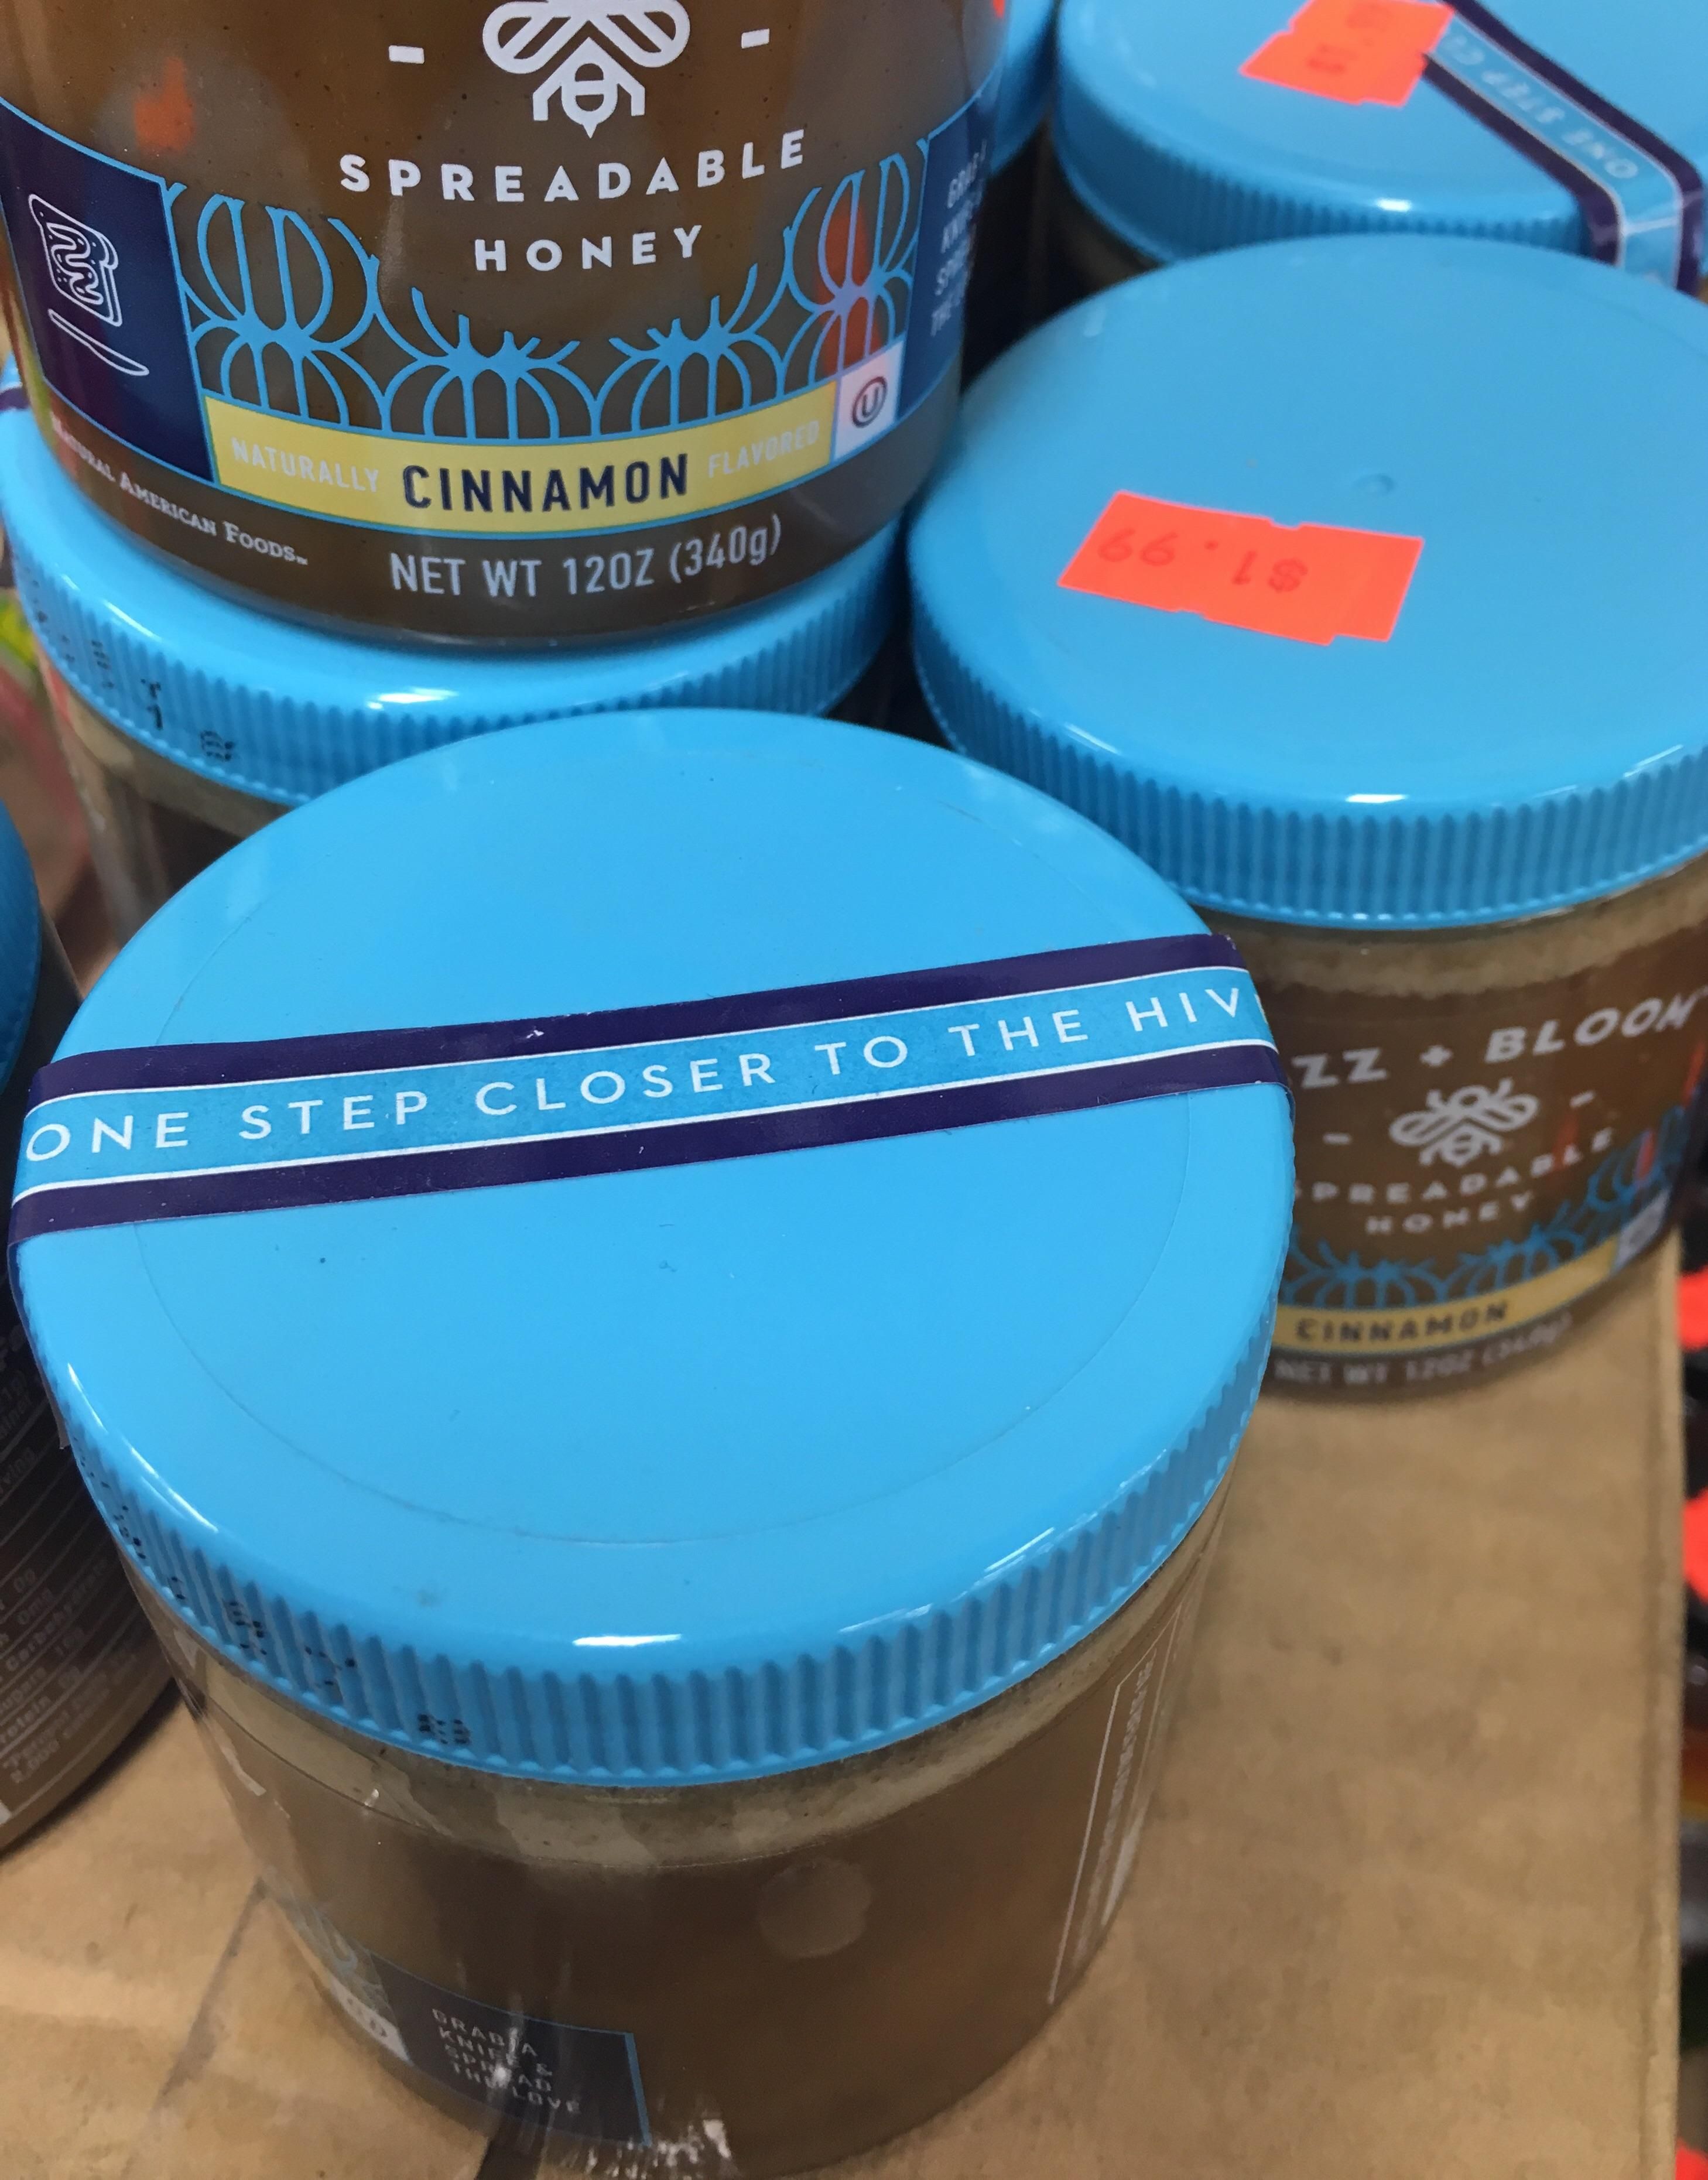 Not sure how to feel about this honey container